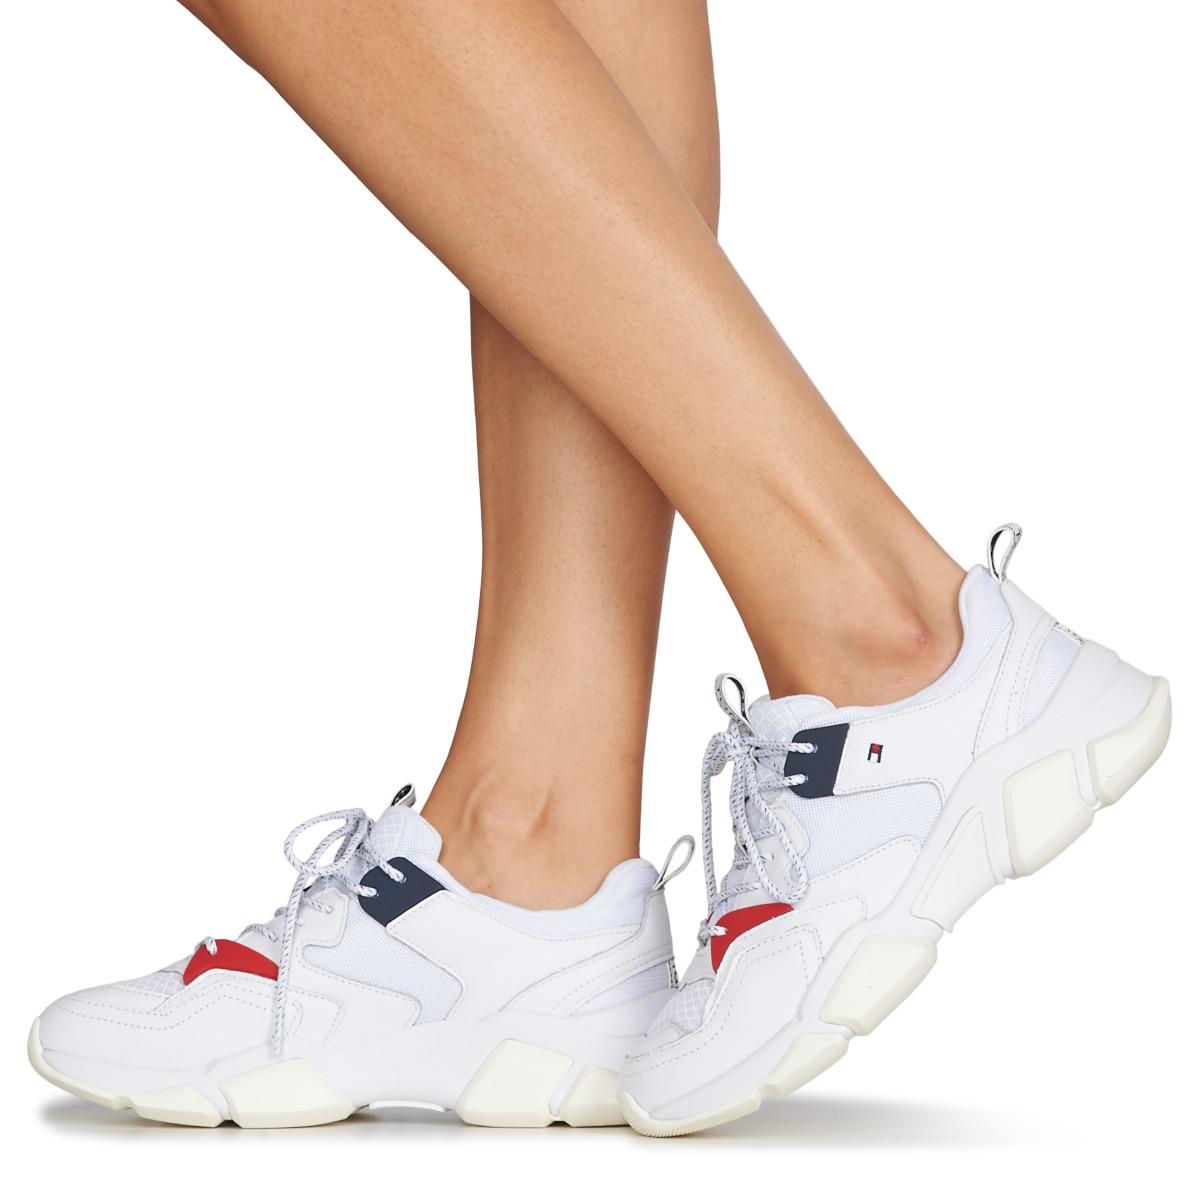 Chunky Mixed Textile Trainers Tommy Hilfiger Discounts Sellers, 64% OFF |  evanstoncinci.org